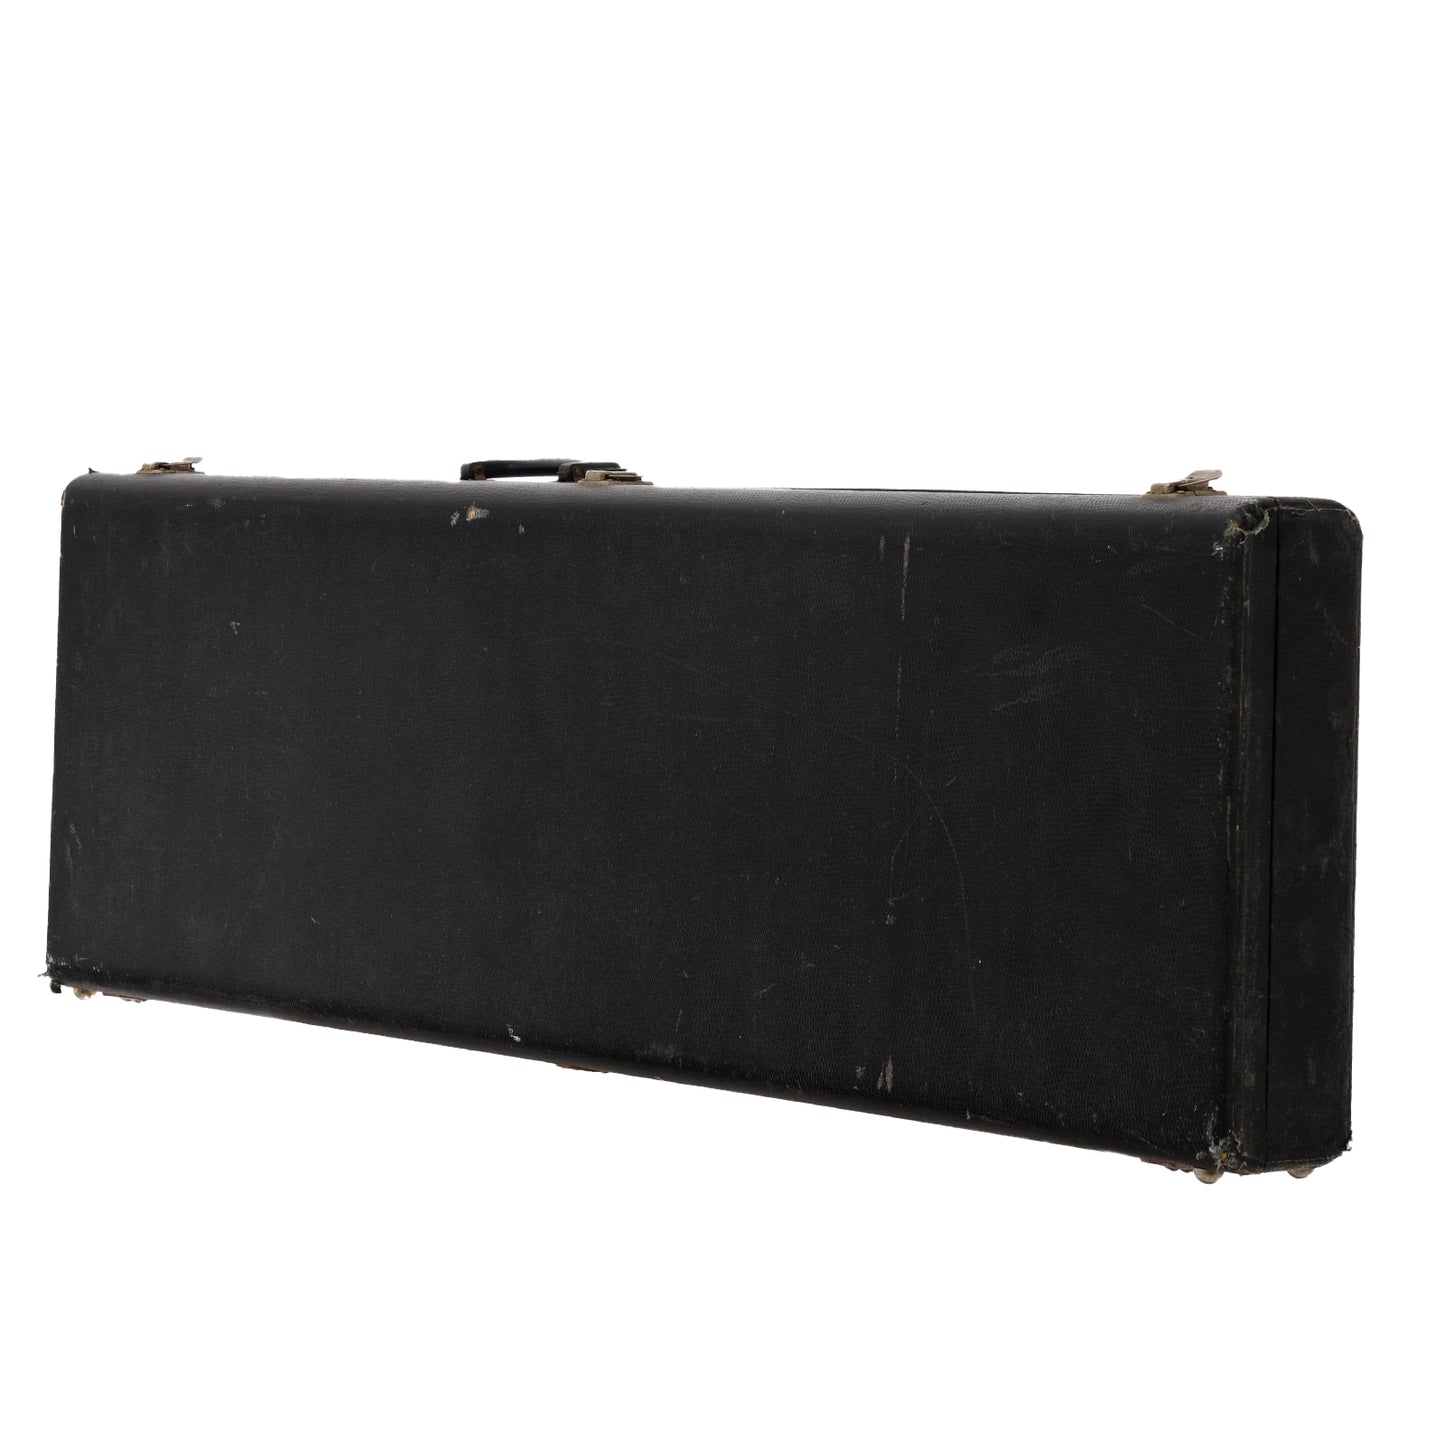 Case for Gibson Melody Maker Bass